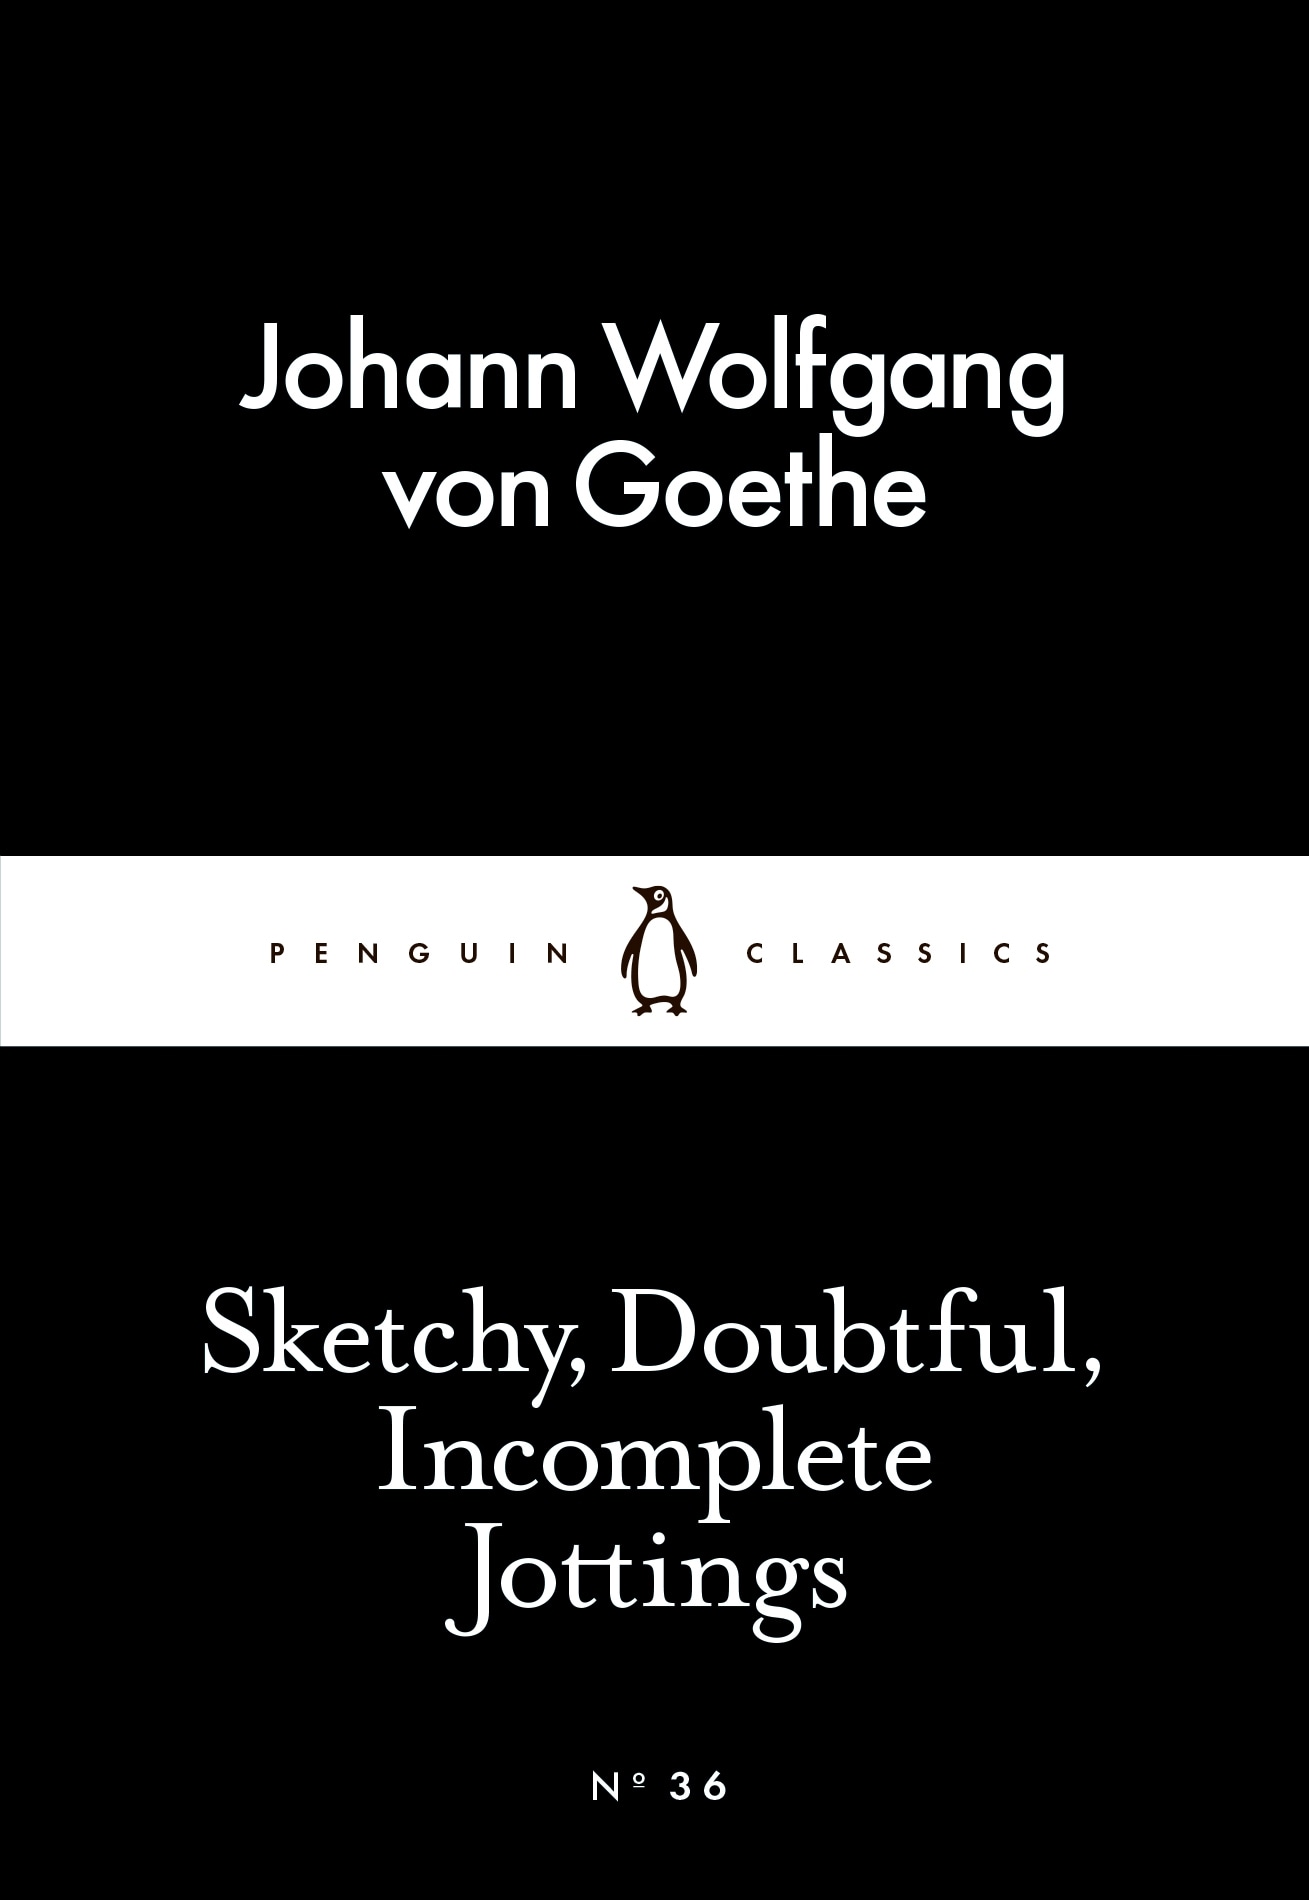 Book “Sketchy, Doubtful, Incomplete Jottings” by Johann Wolfgang von Goethe — February 26, 2015